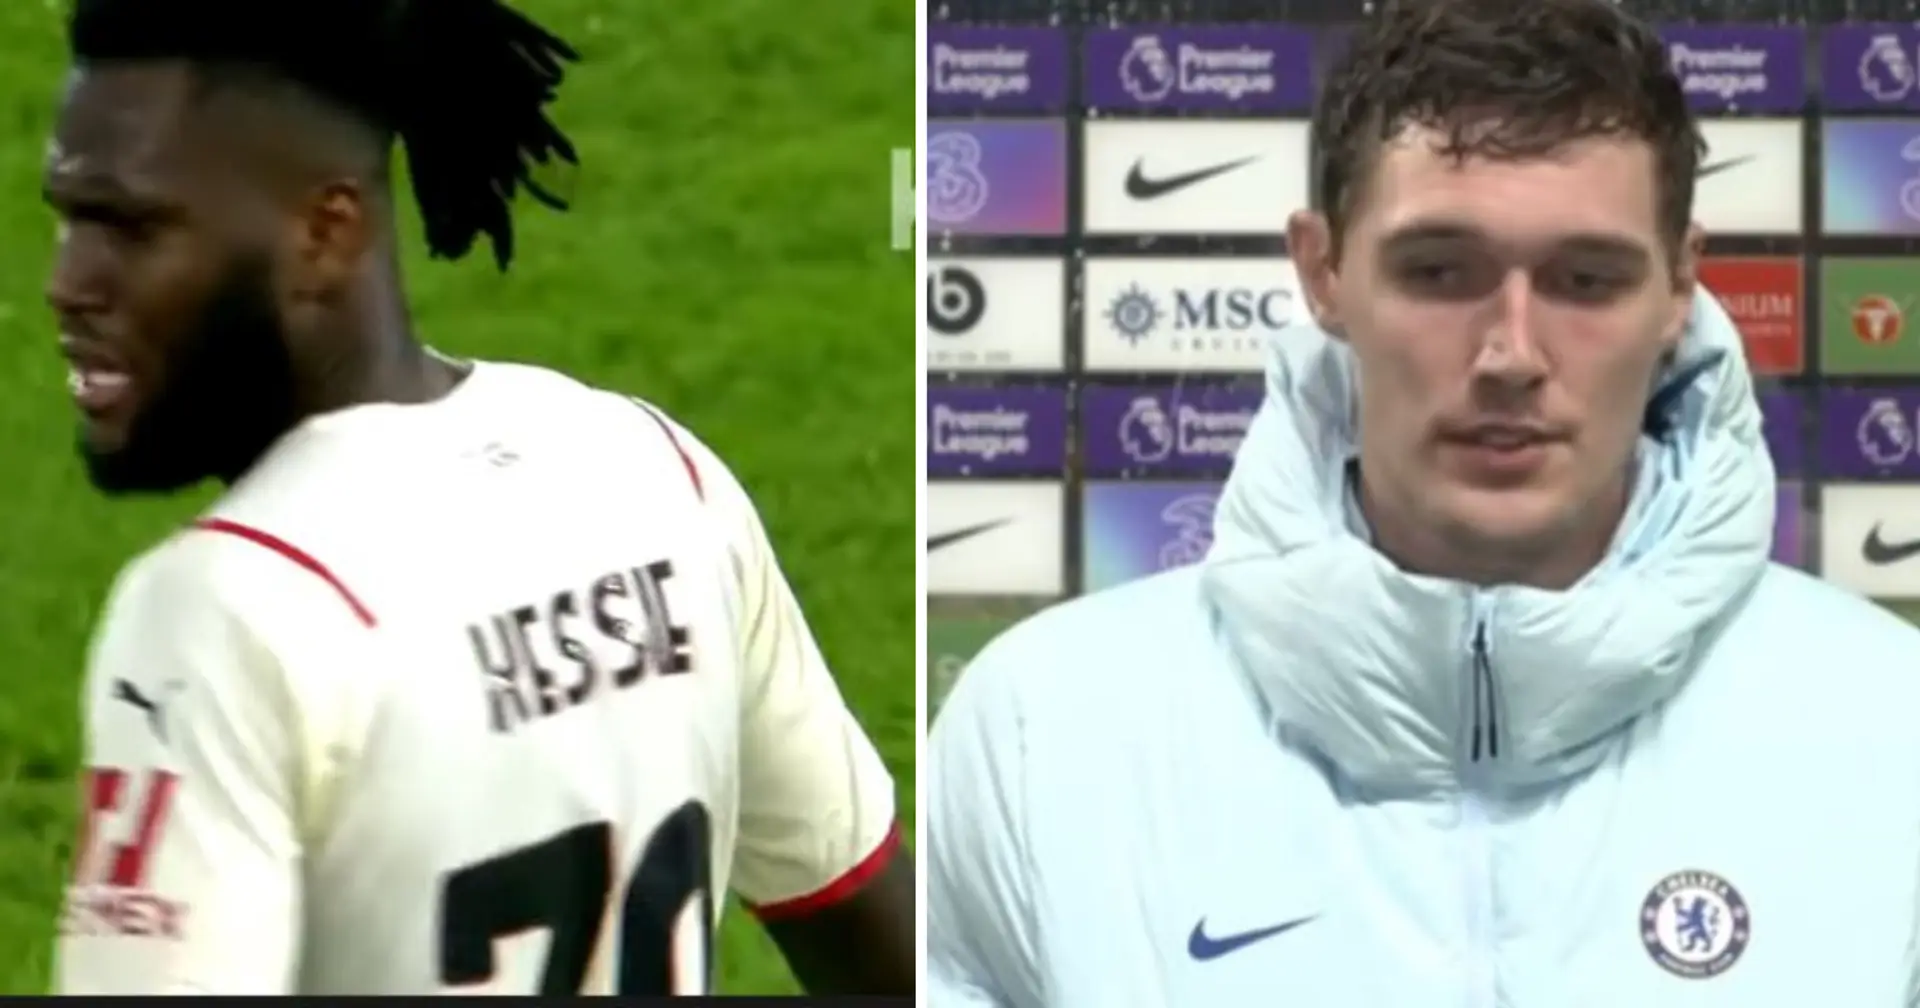 Kessie and Christensen to arrive at Barcelona under contrasting fortunes: Explained